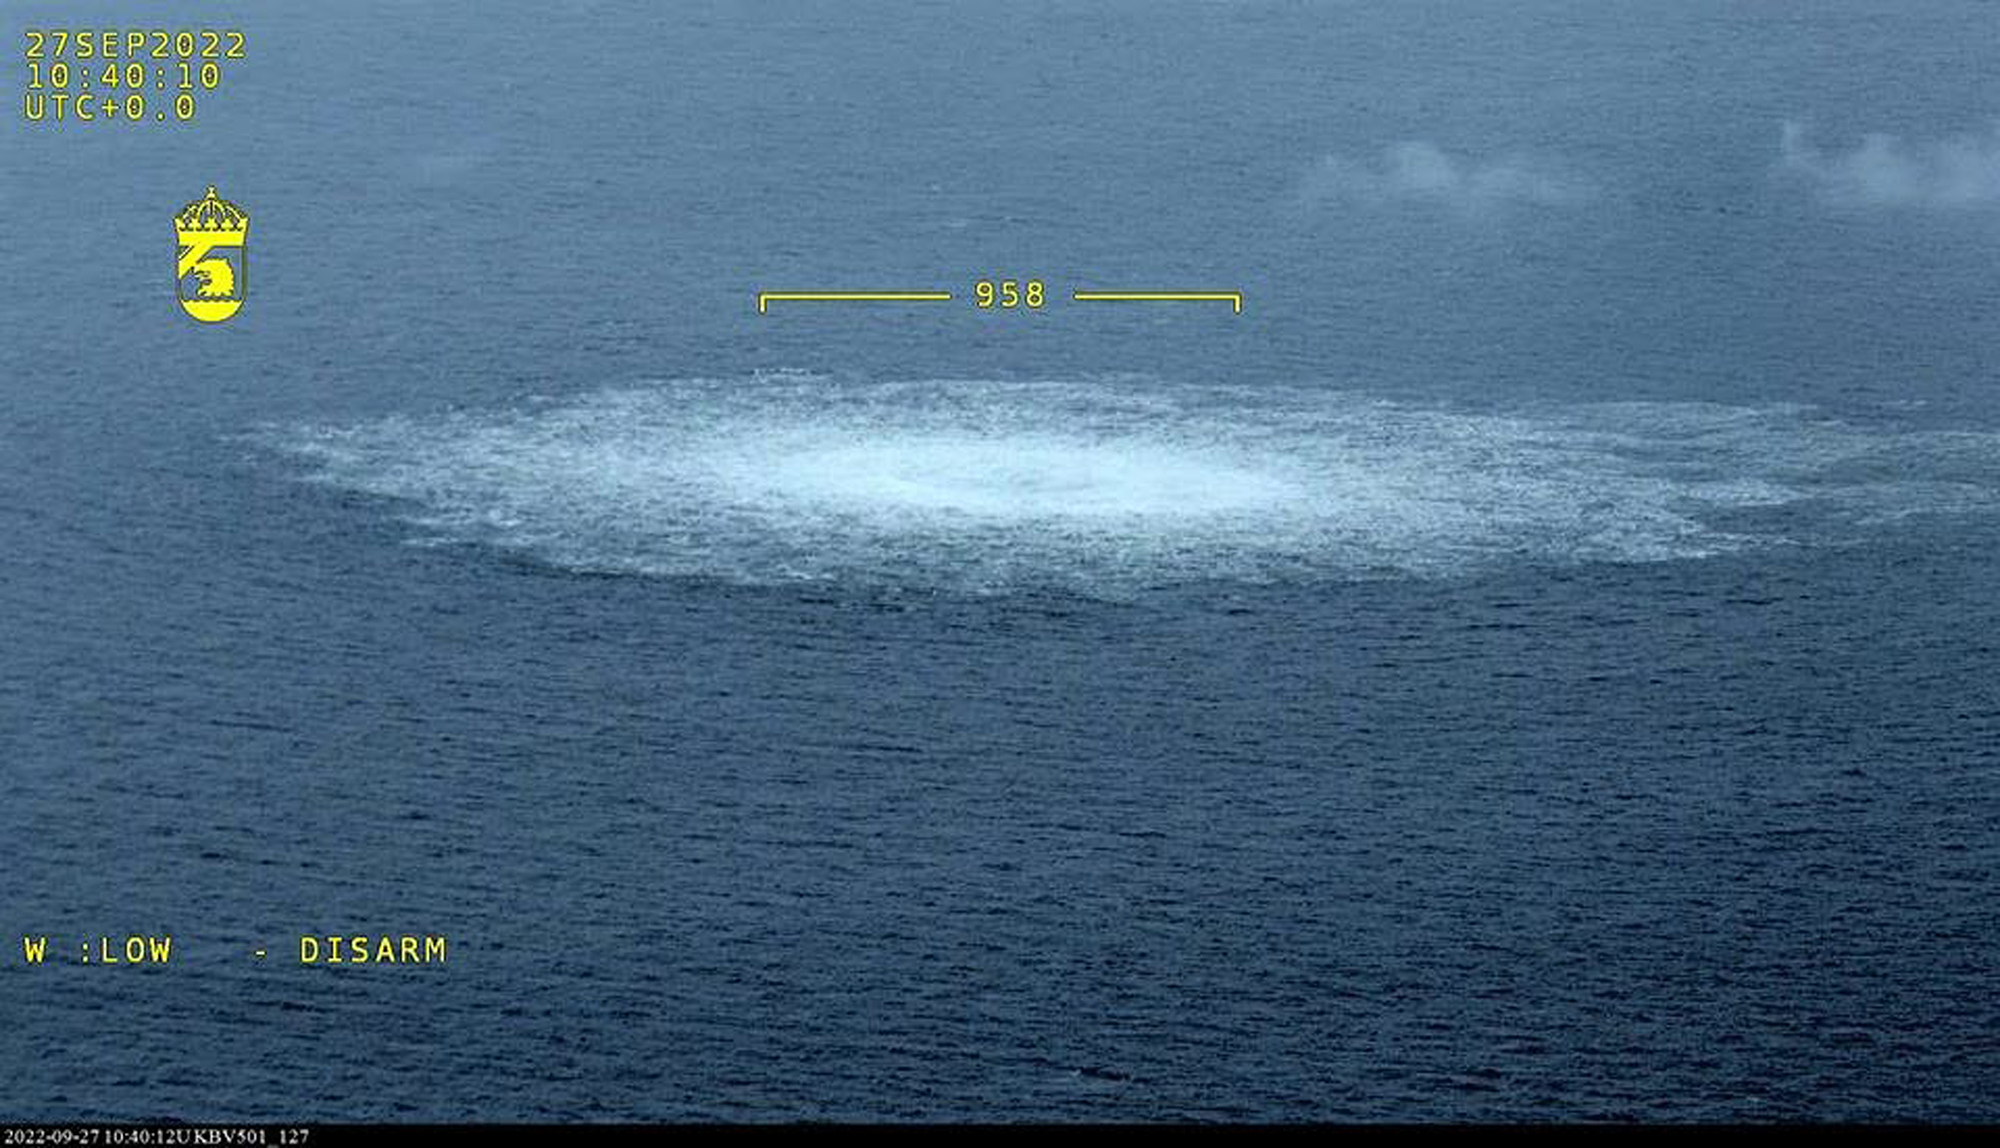 Gas from a leak from the Nord Stream 2 natural gas pipeline in the Baltic Sea on September 27.